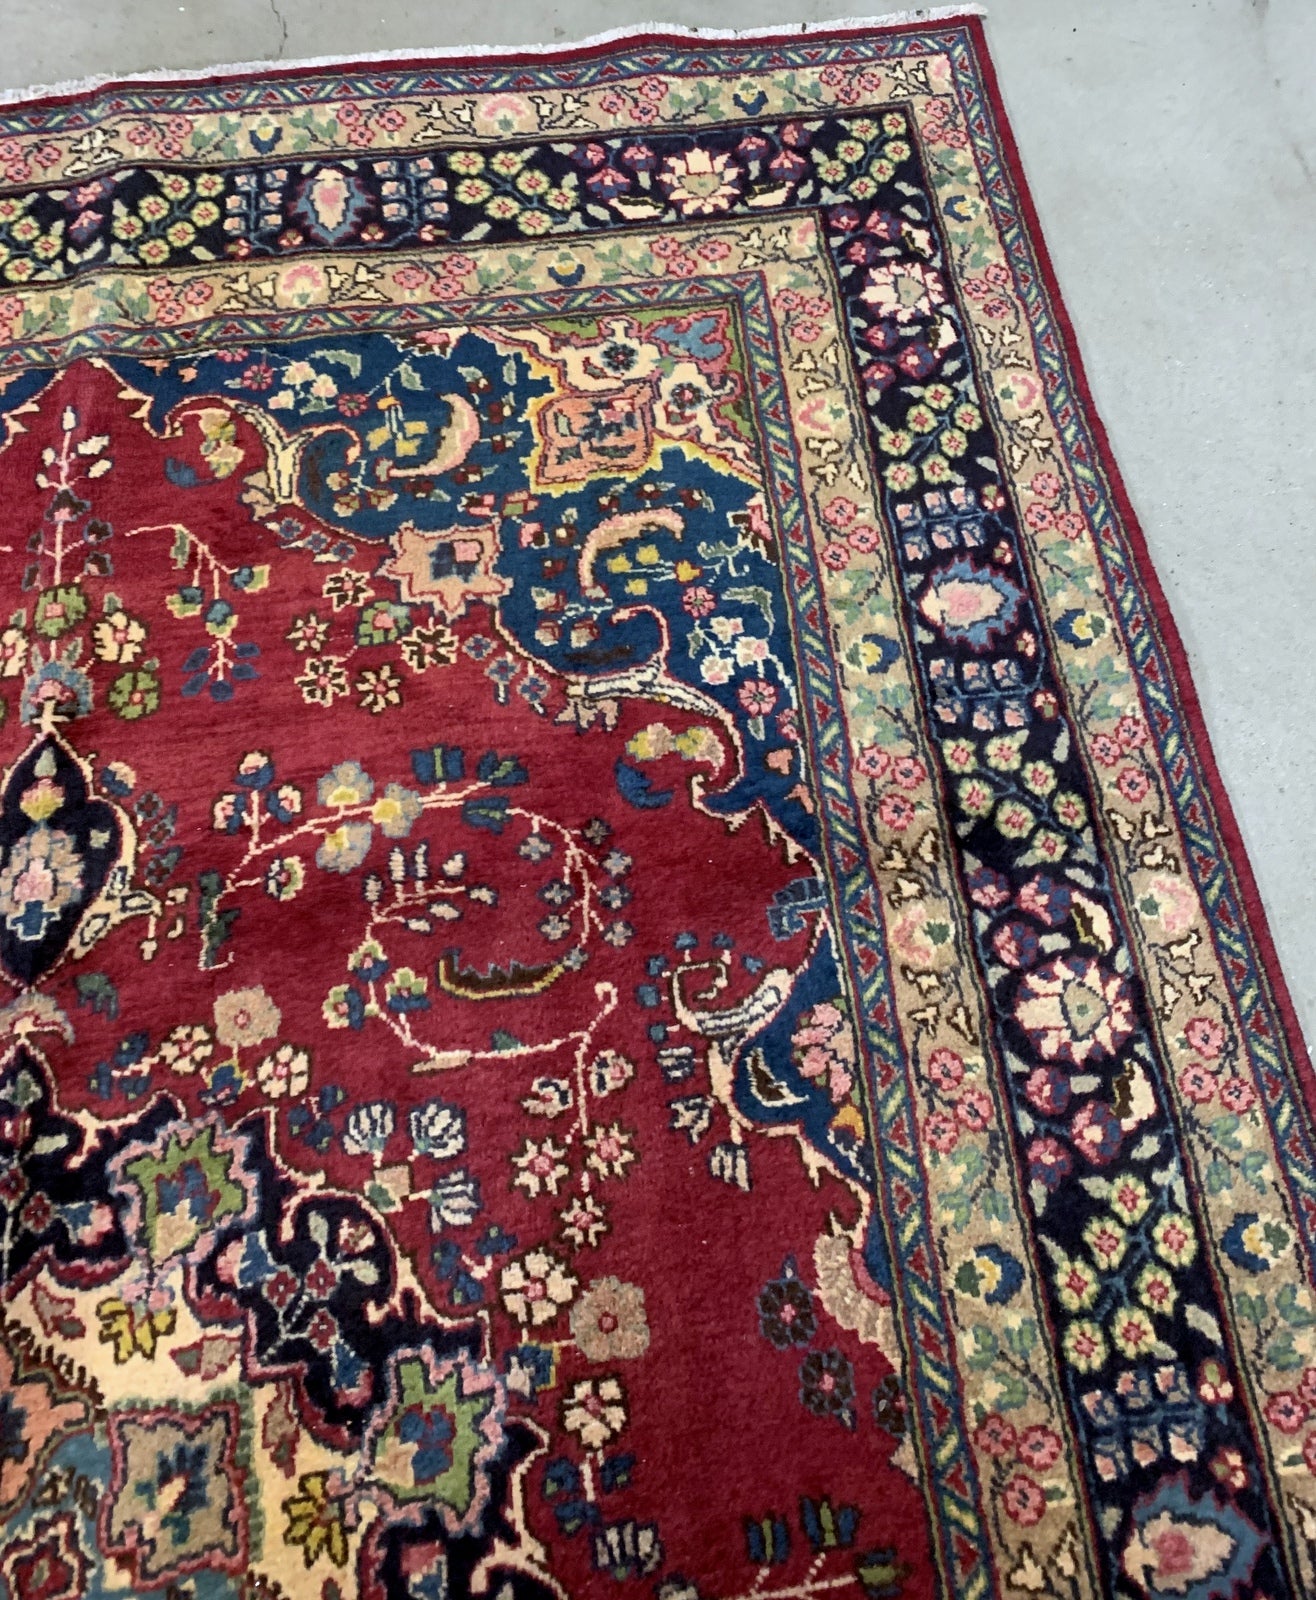 Handmade vintage Middle Eastern rug in traditional design. The rug is from the middle of 20th century in original good condition.